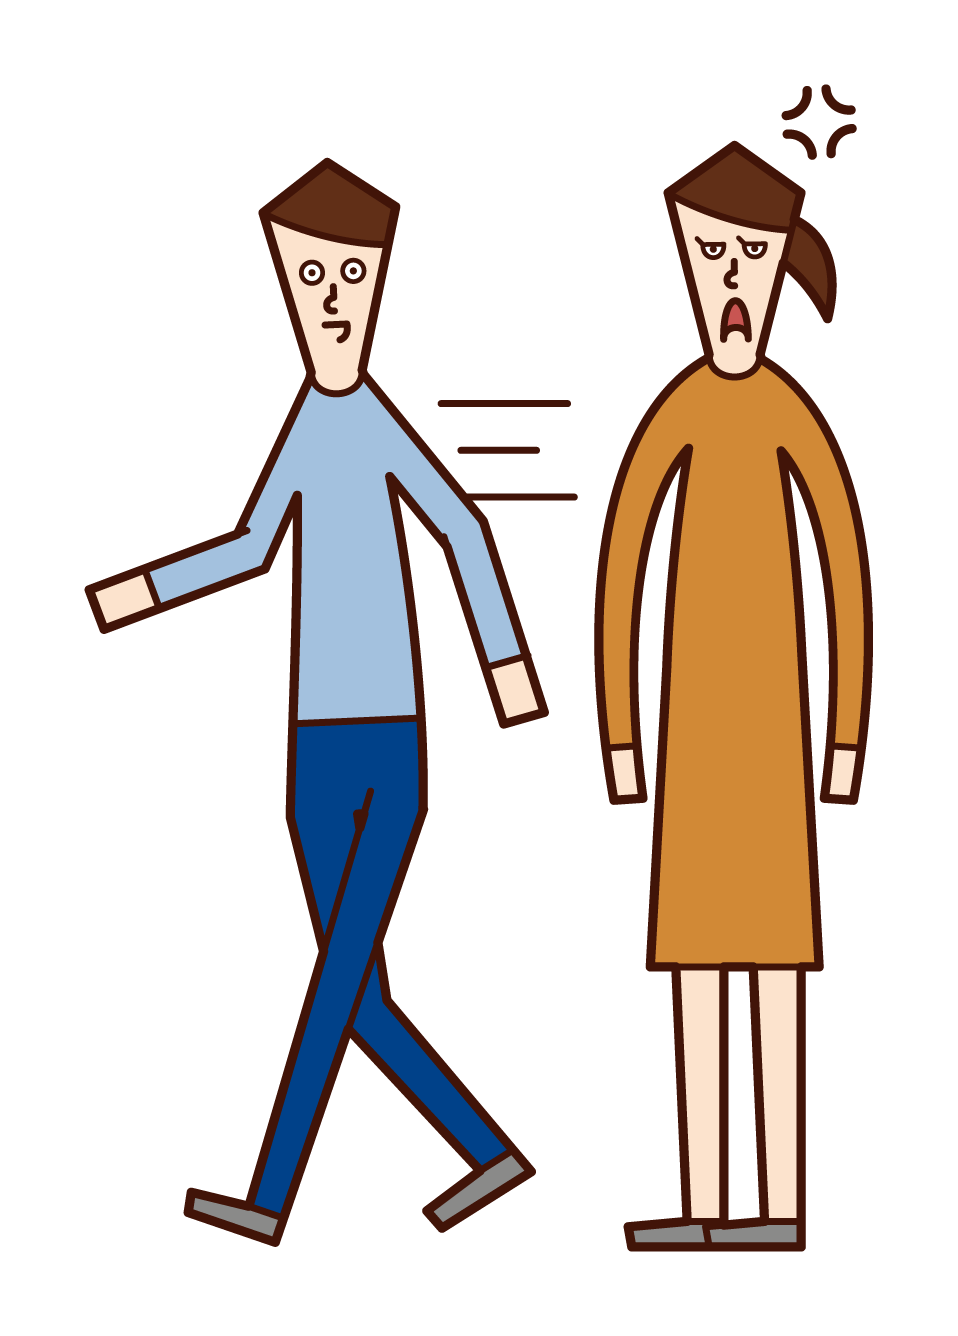 Illustration of a man walking fast while dating